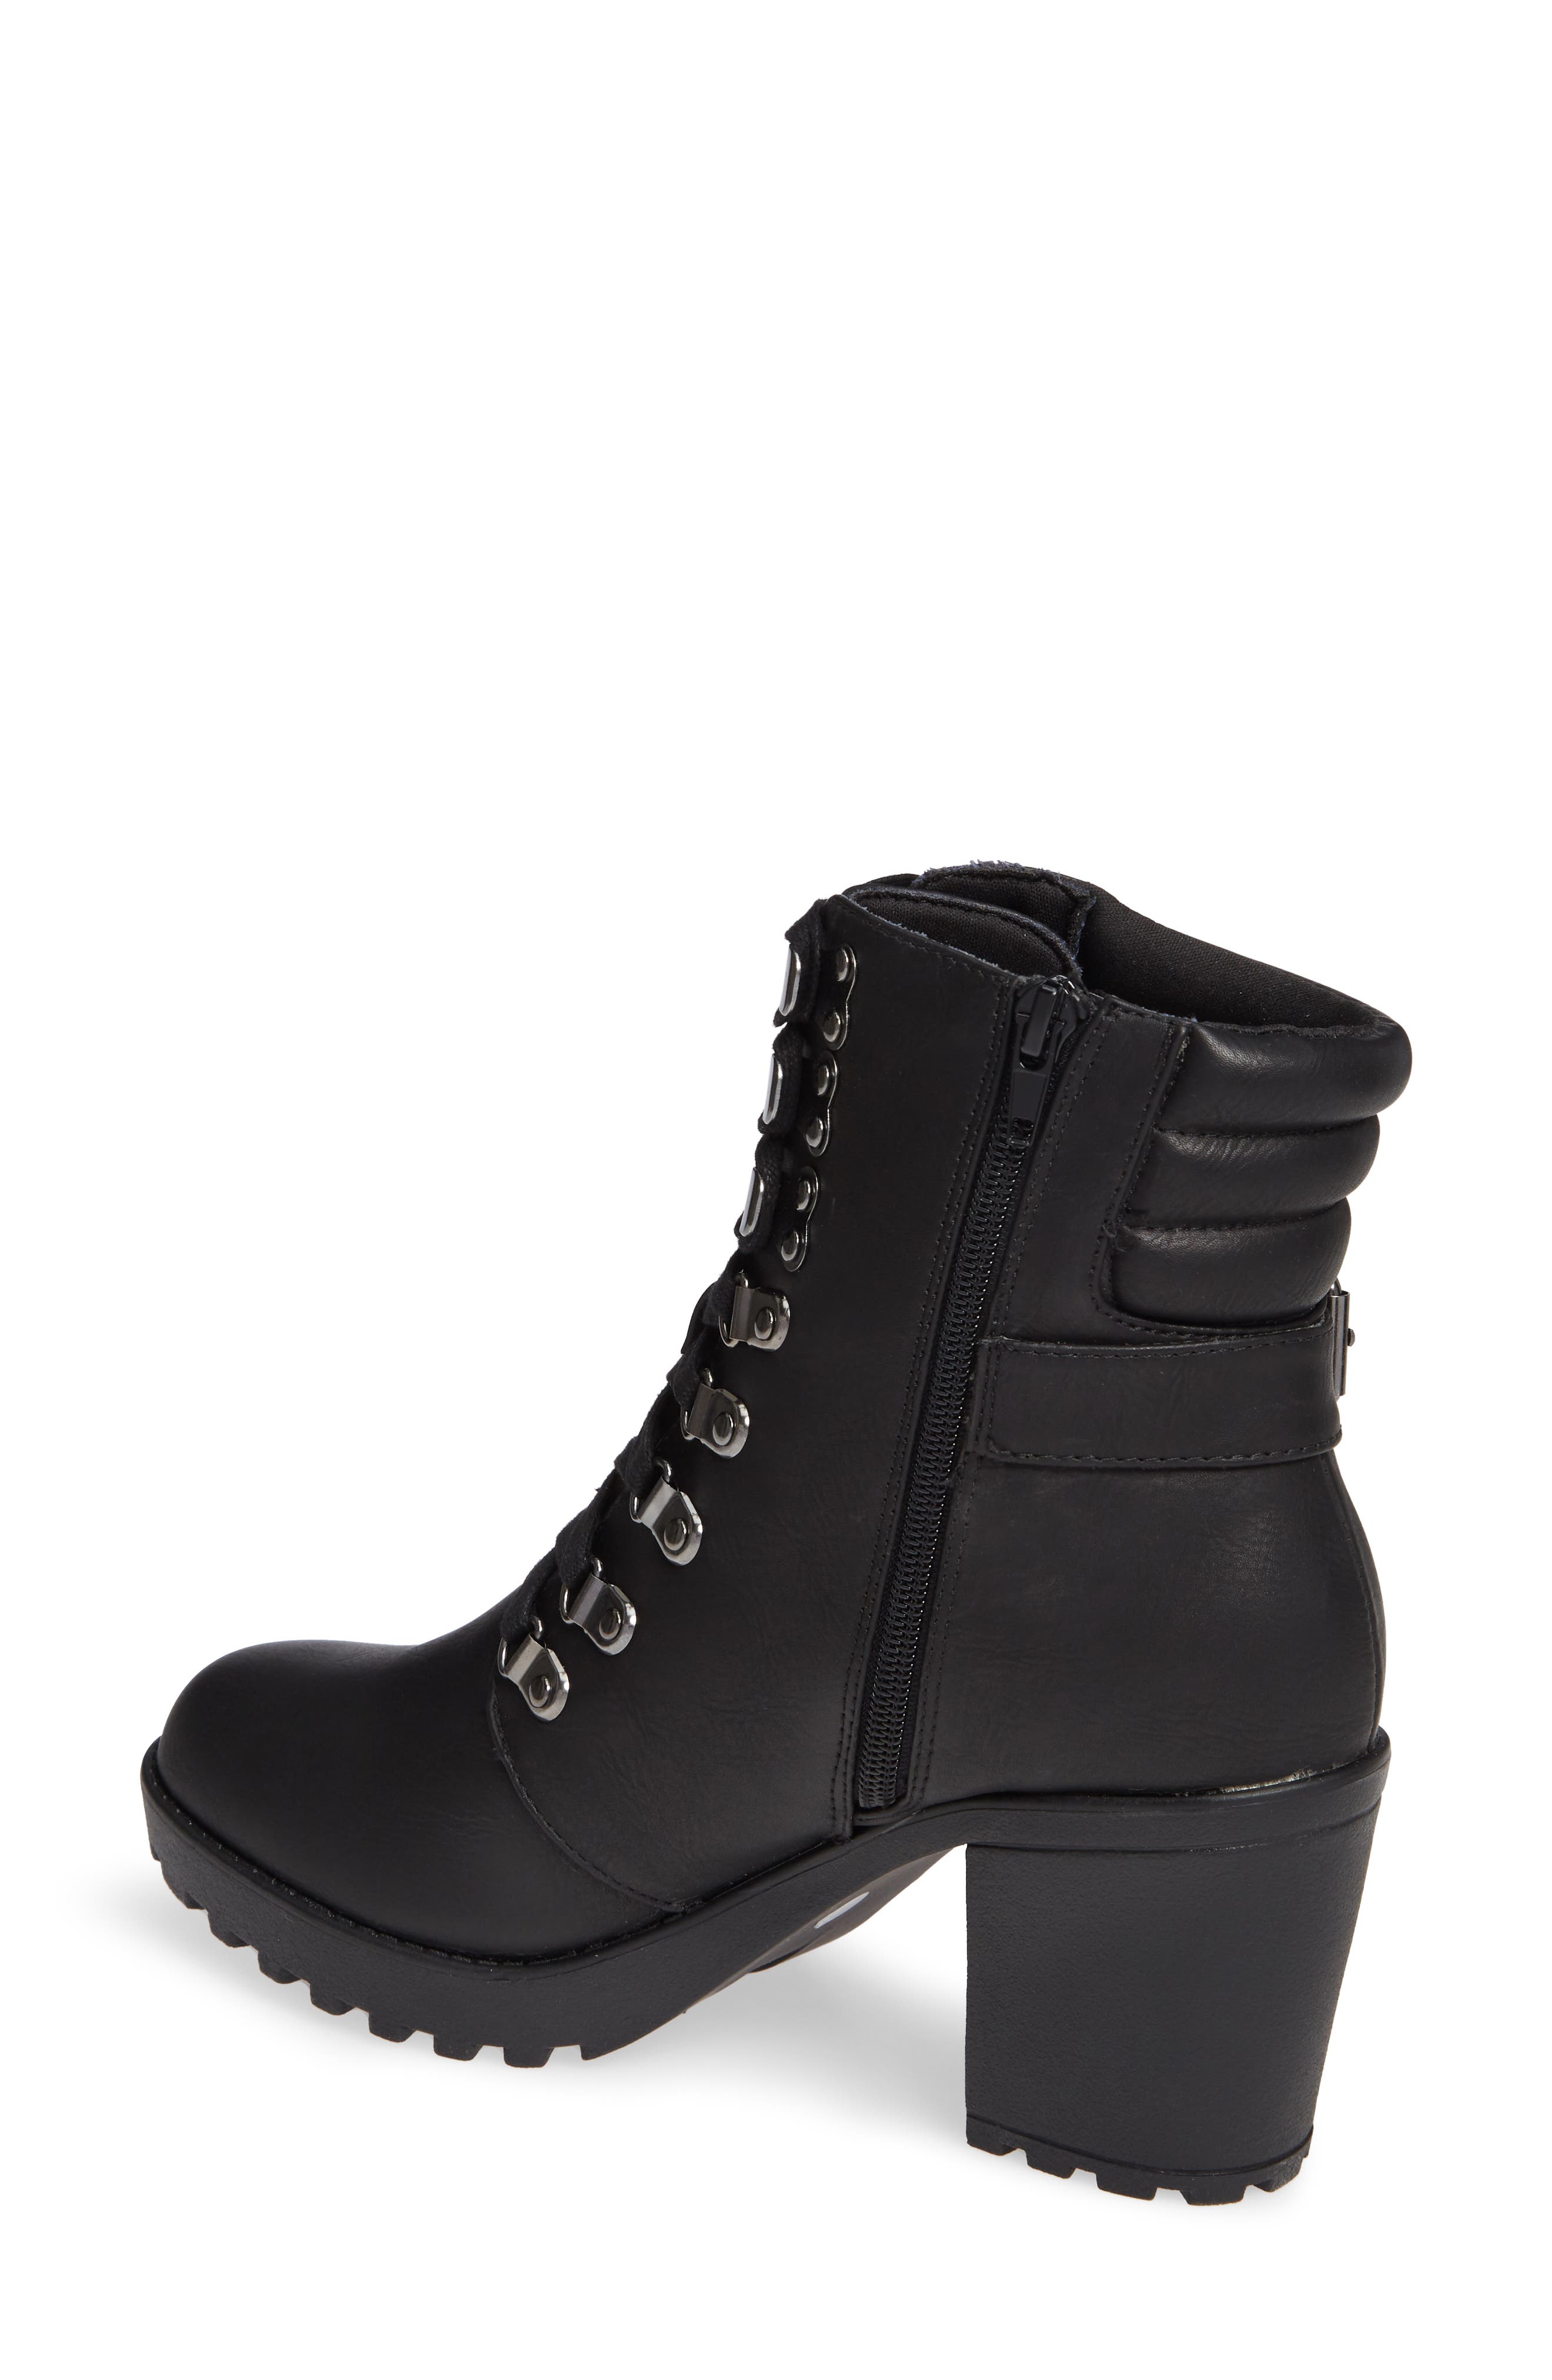 mia floraa lace up bootie